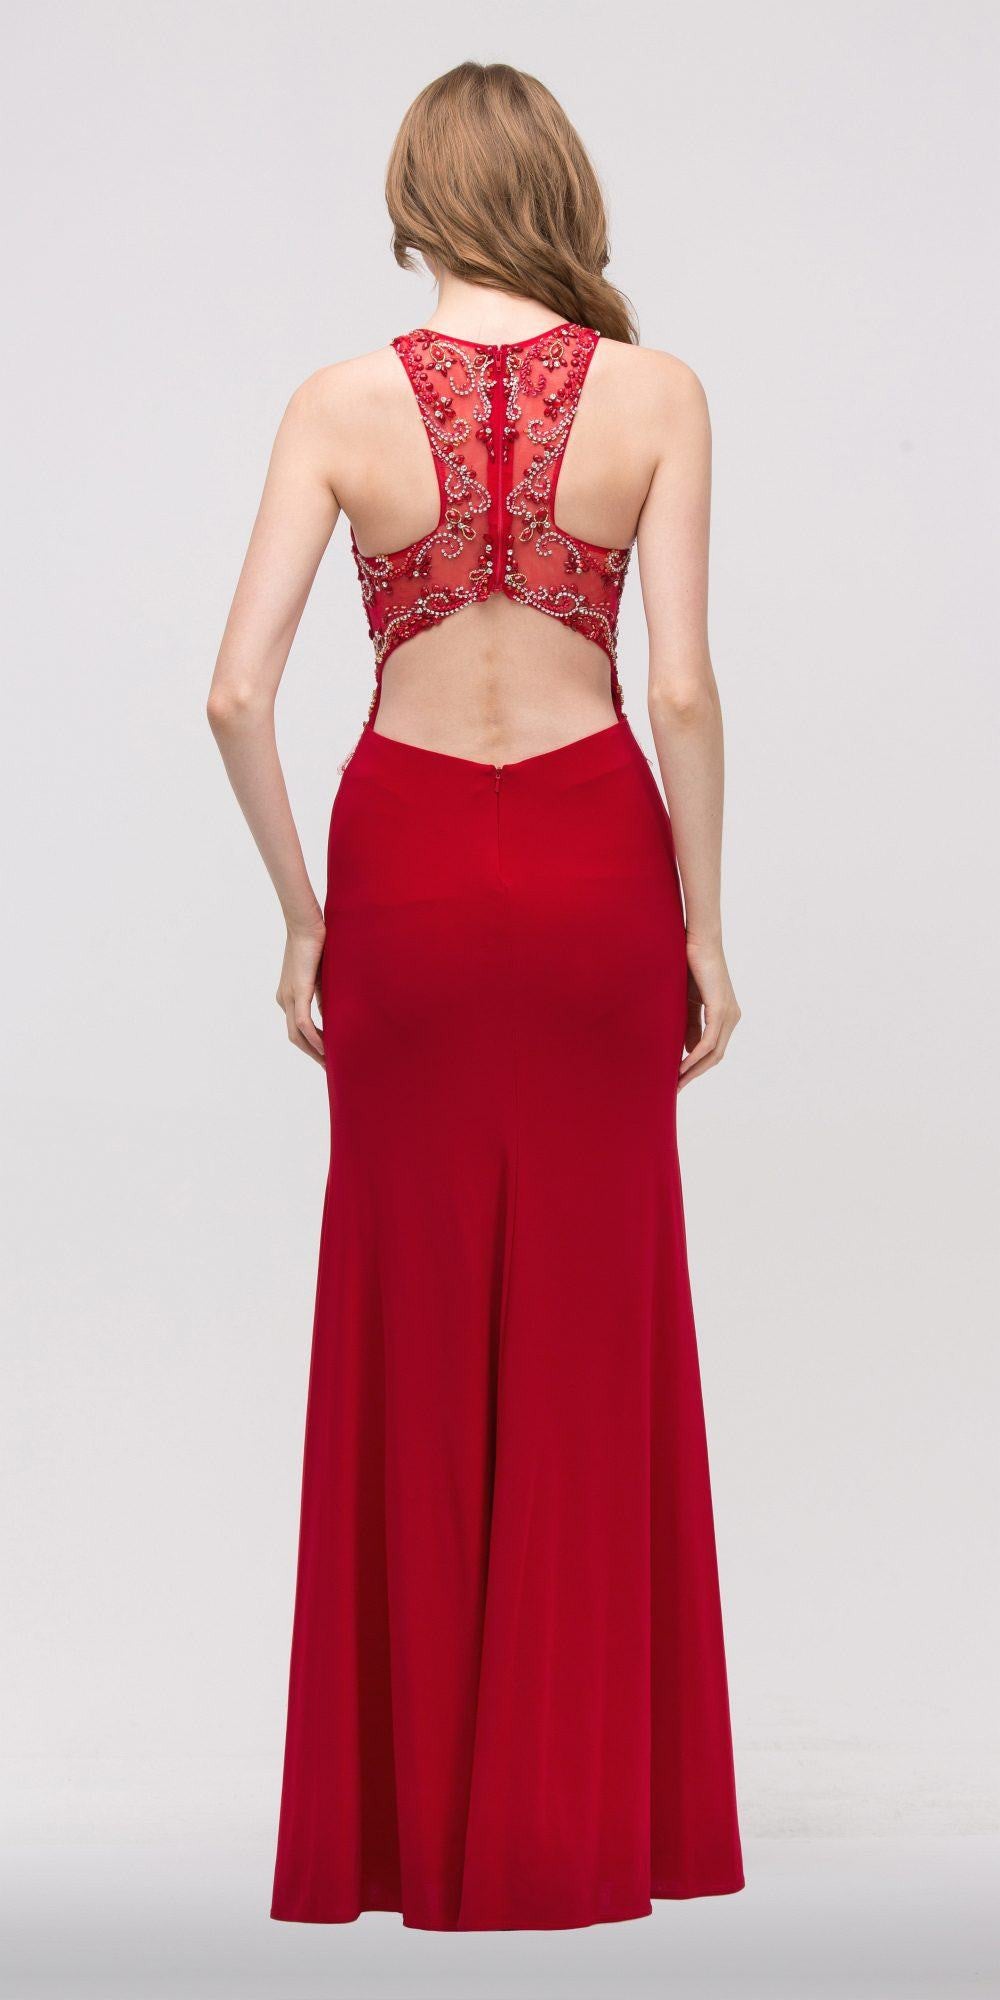 Grecian Inspired Gown Red Floor Length Illusion Neck Beads Back